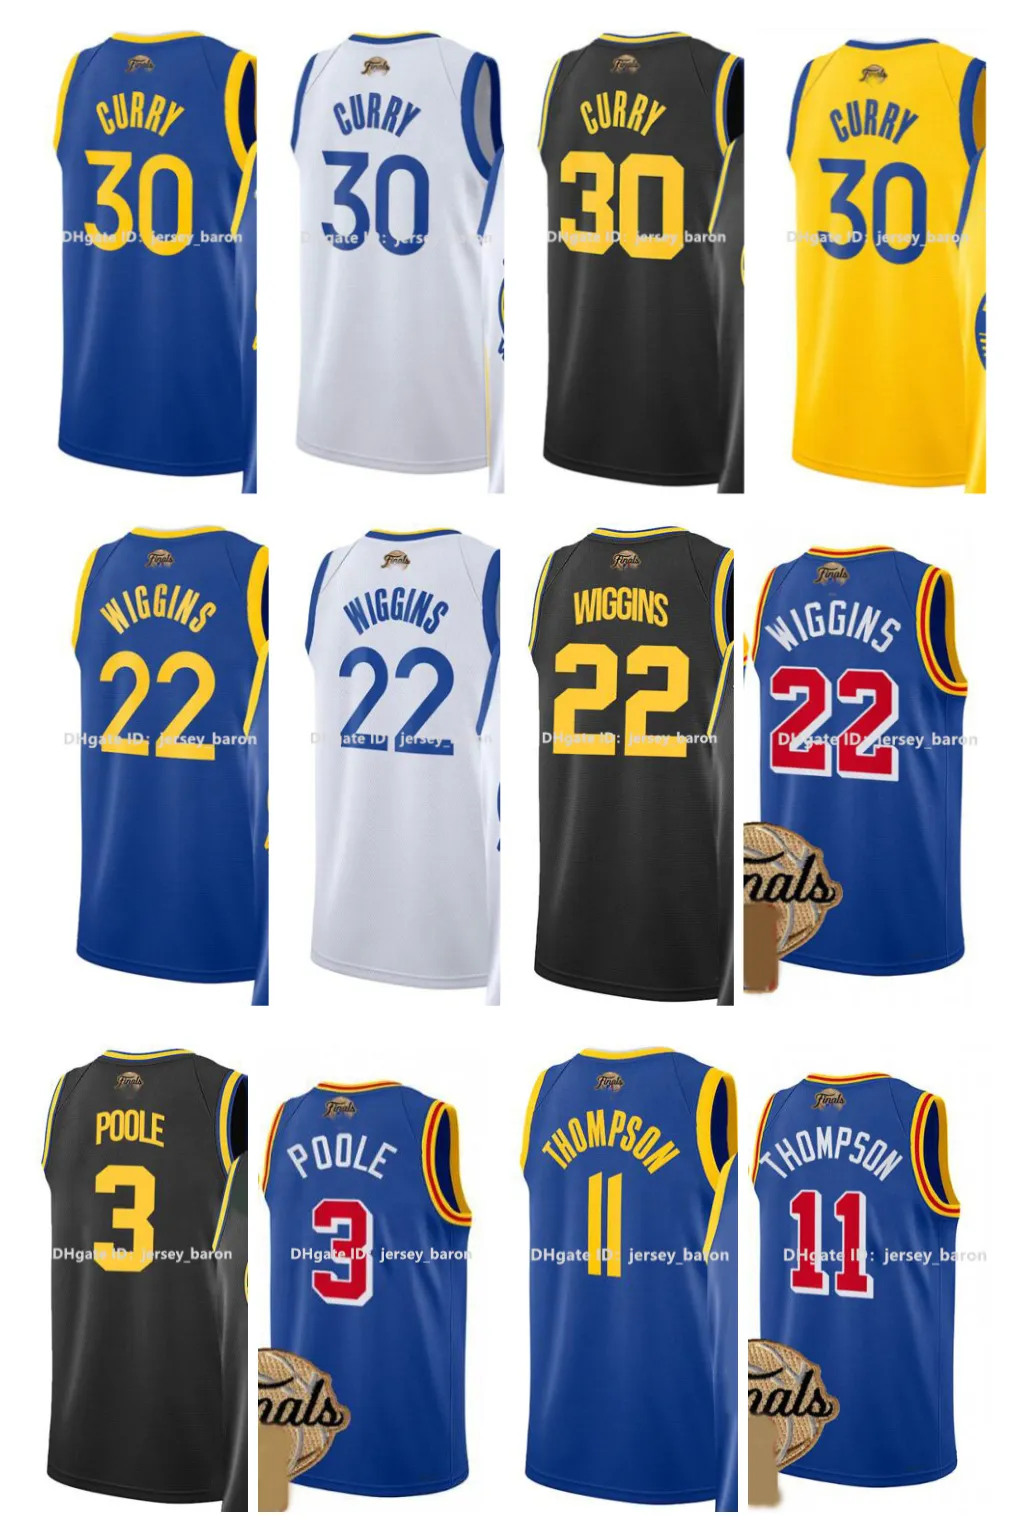 SL 2022 Finals Patch Stephen Curry Basketball Jersey Klay Thompson Sleeveless 75th Andrew Wiggins 3 Poole Jerseys Blue White Black